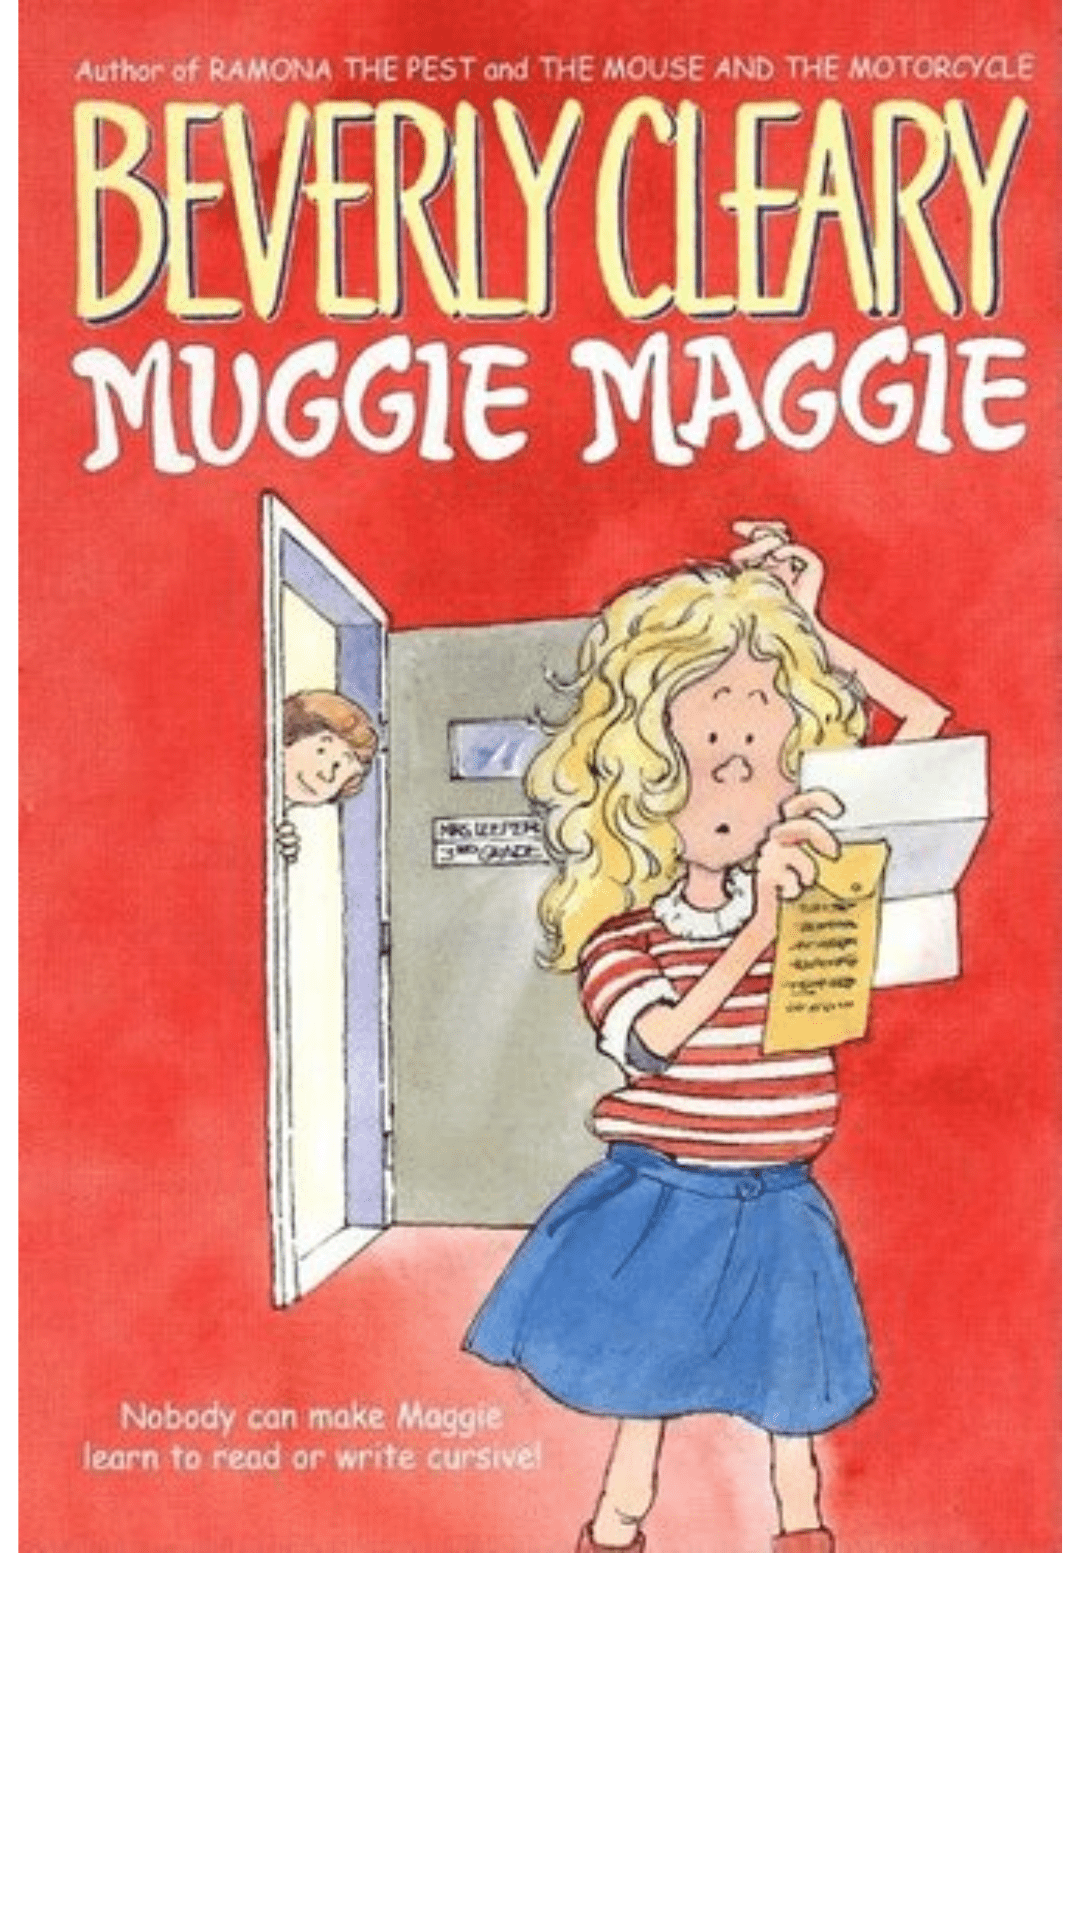 Muggie Maggie by Beverly Cleary